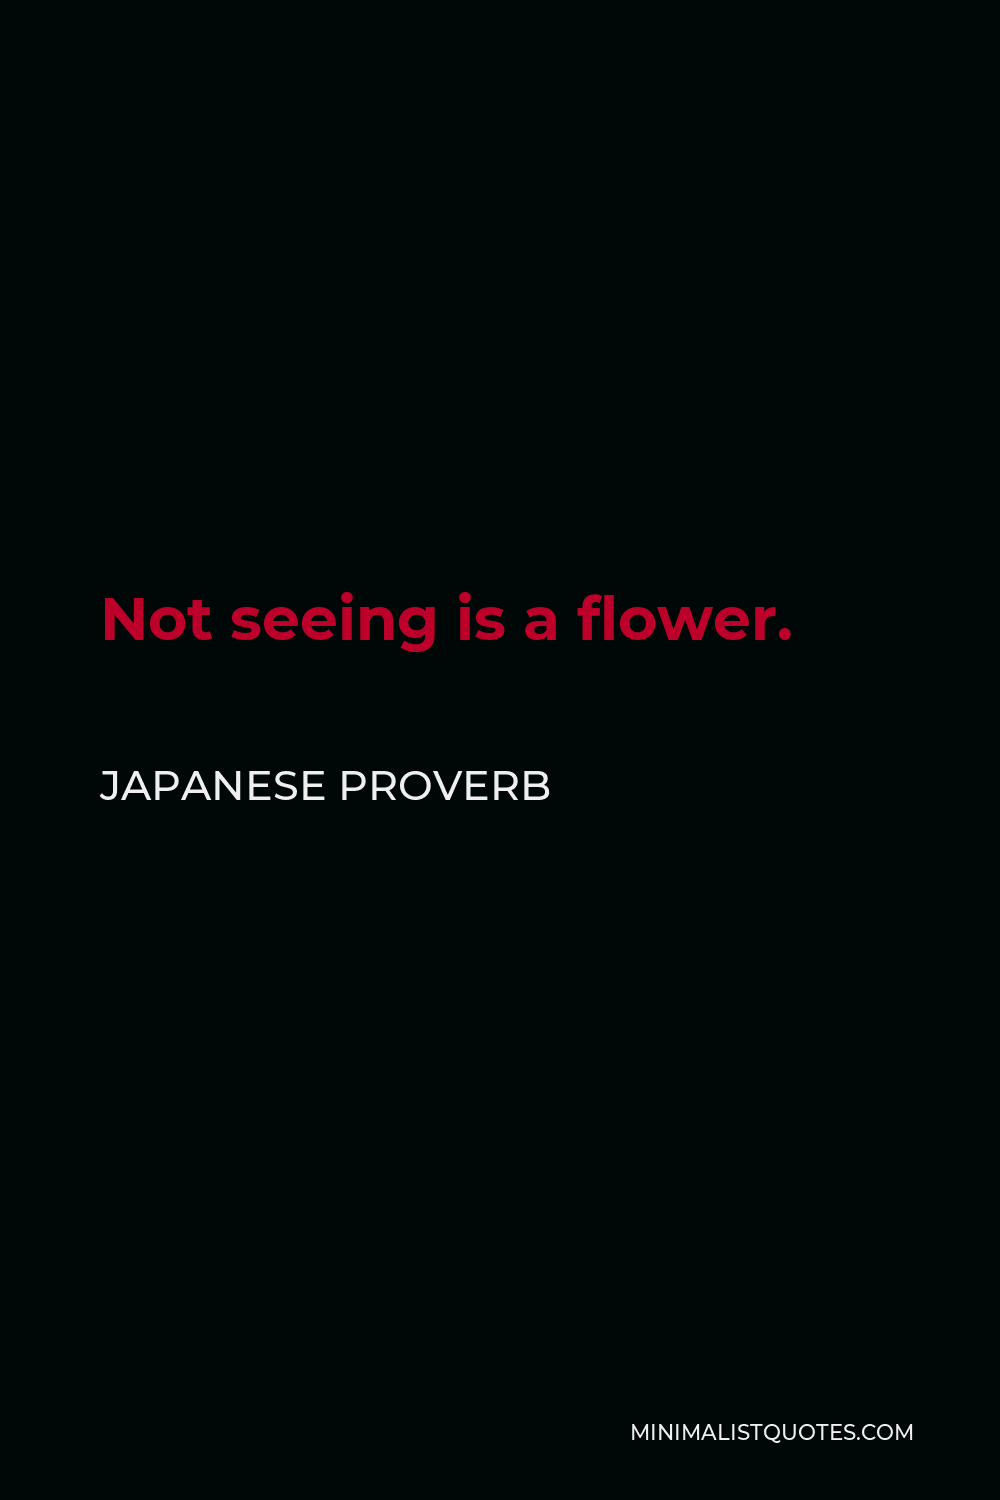 Japanese Proverb Quote - Not seeing is a flower.